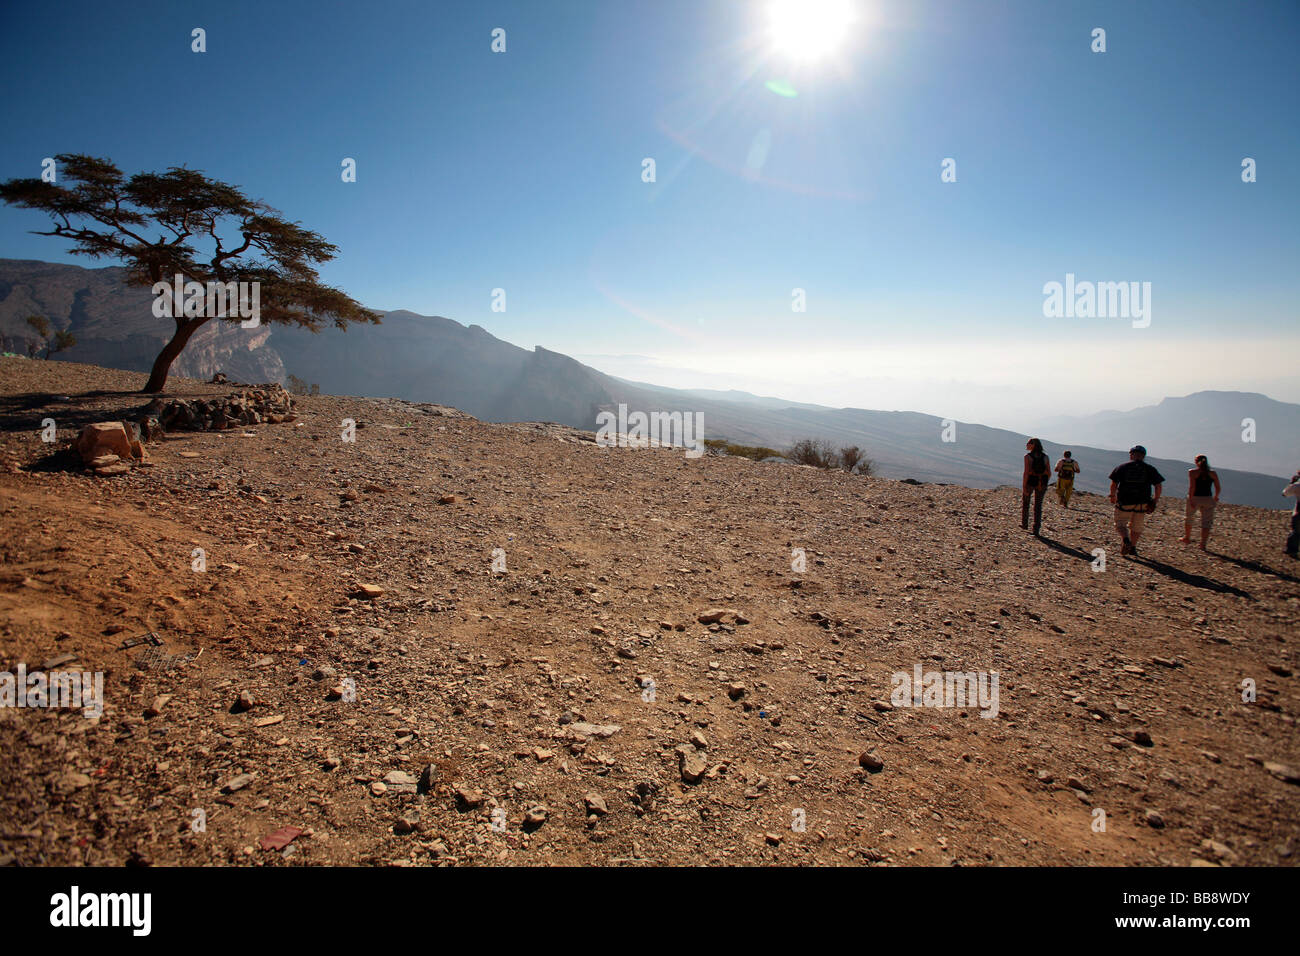 A group of tourists walking to the edge of Jebel Shams in Oman Stock Photo